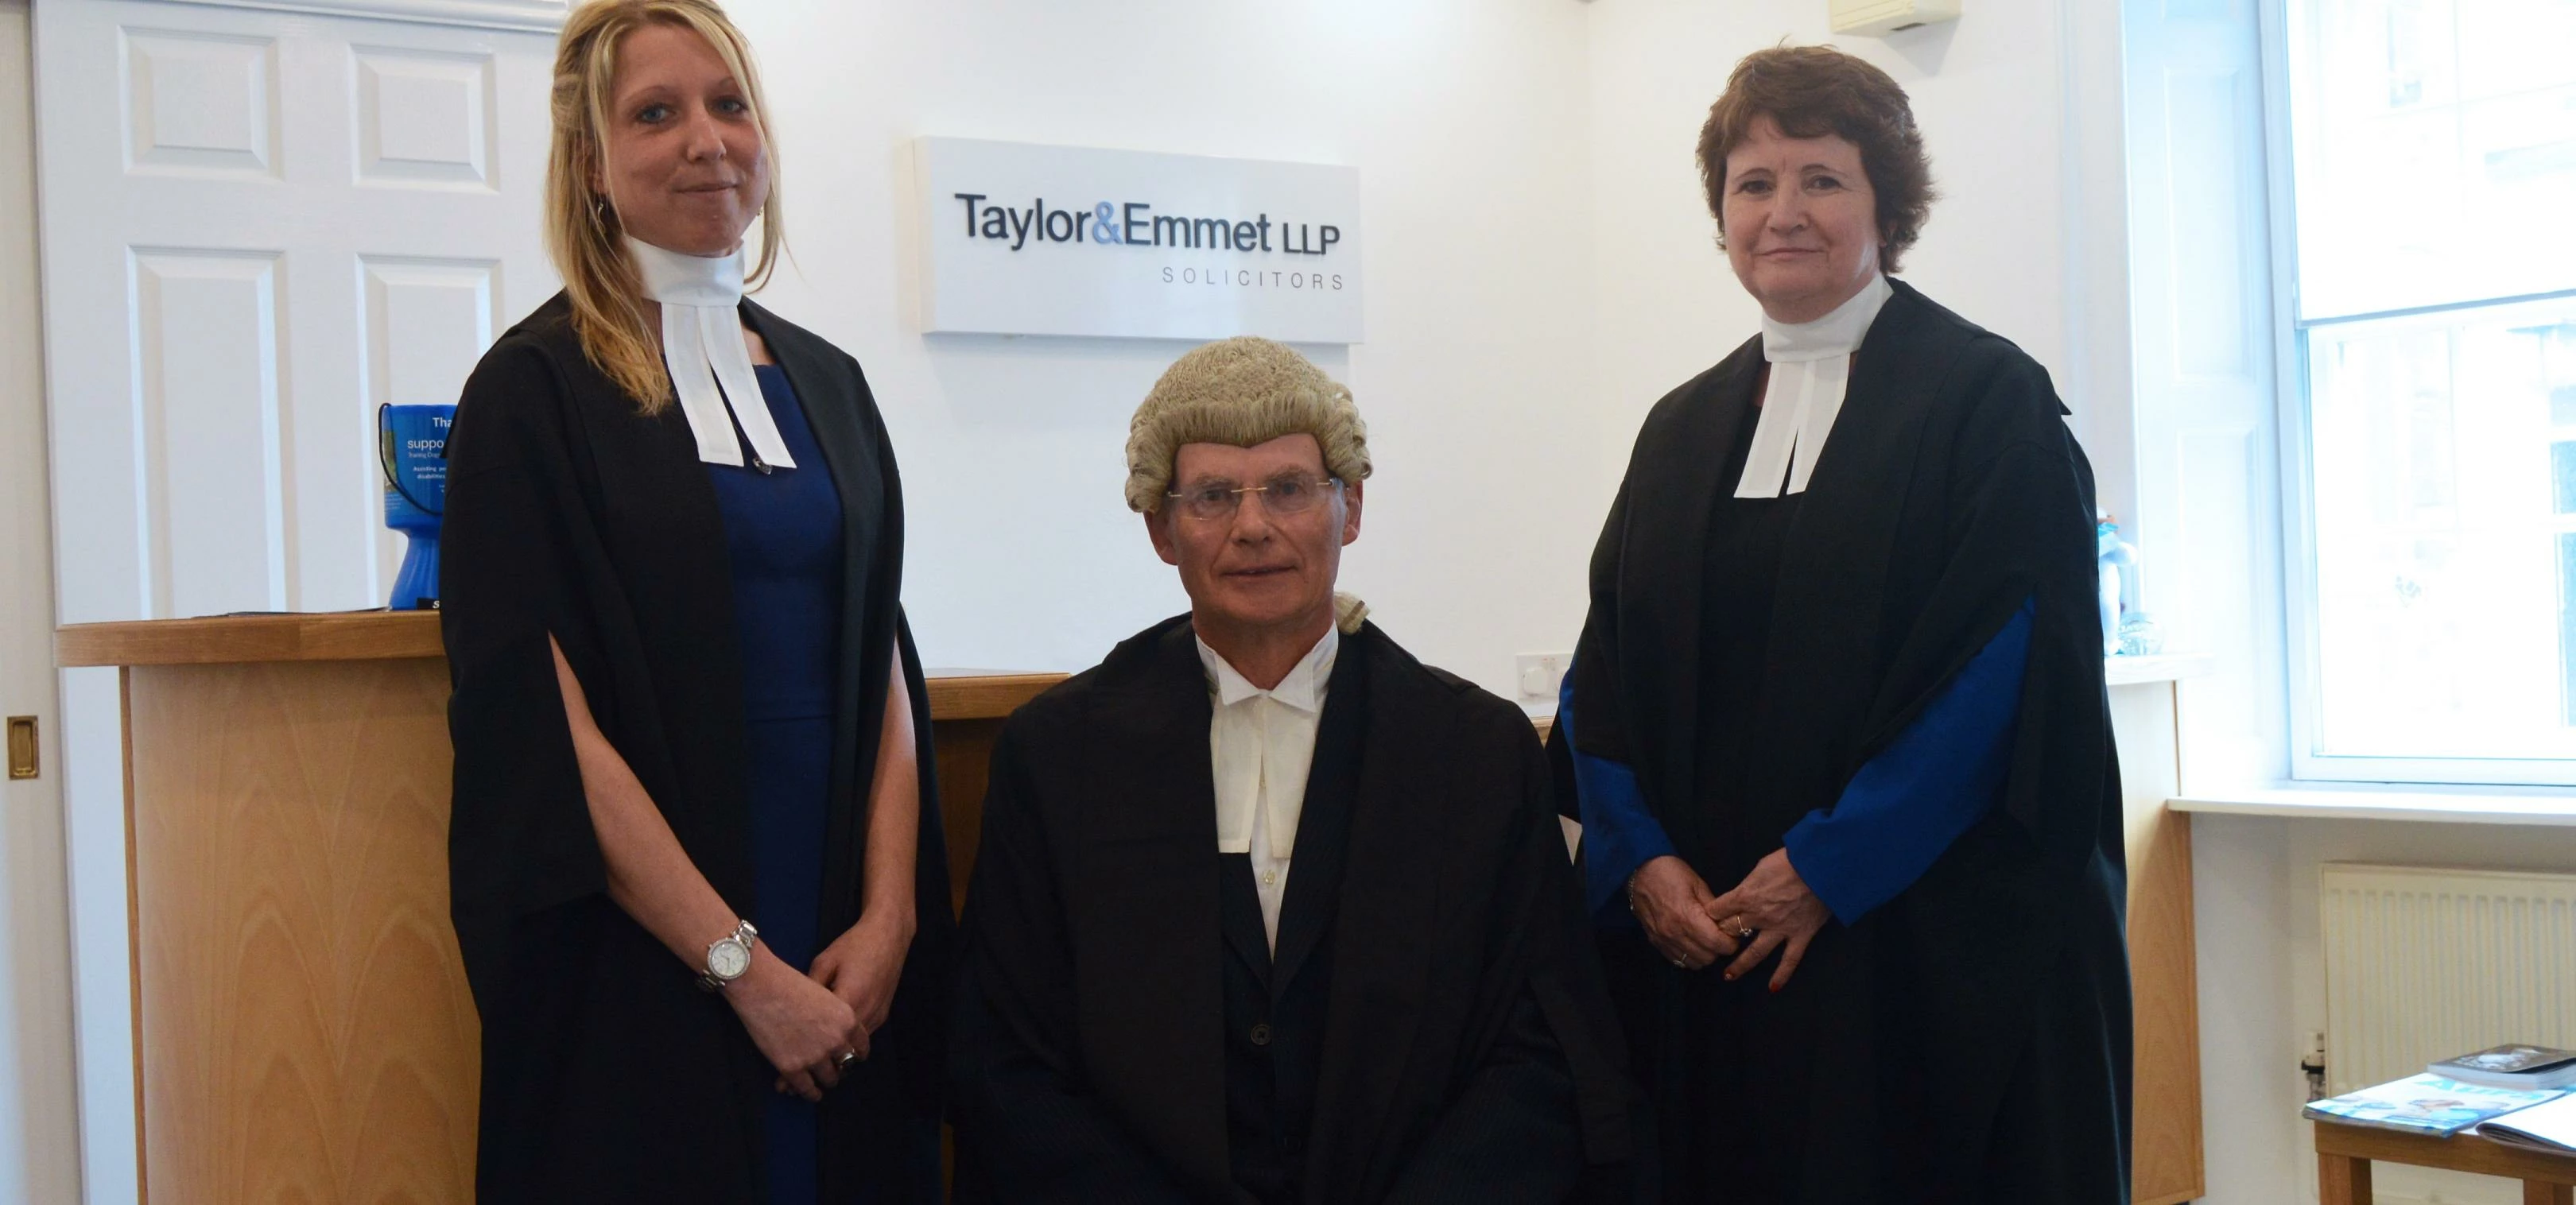 Barmote steward, Michael Cockerton, with newly appointed deputies, Taylor&Emmet's Suzanne Porter (le